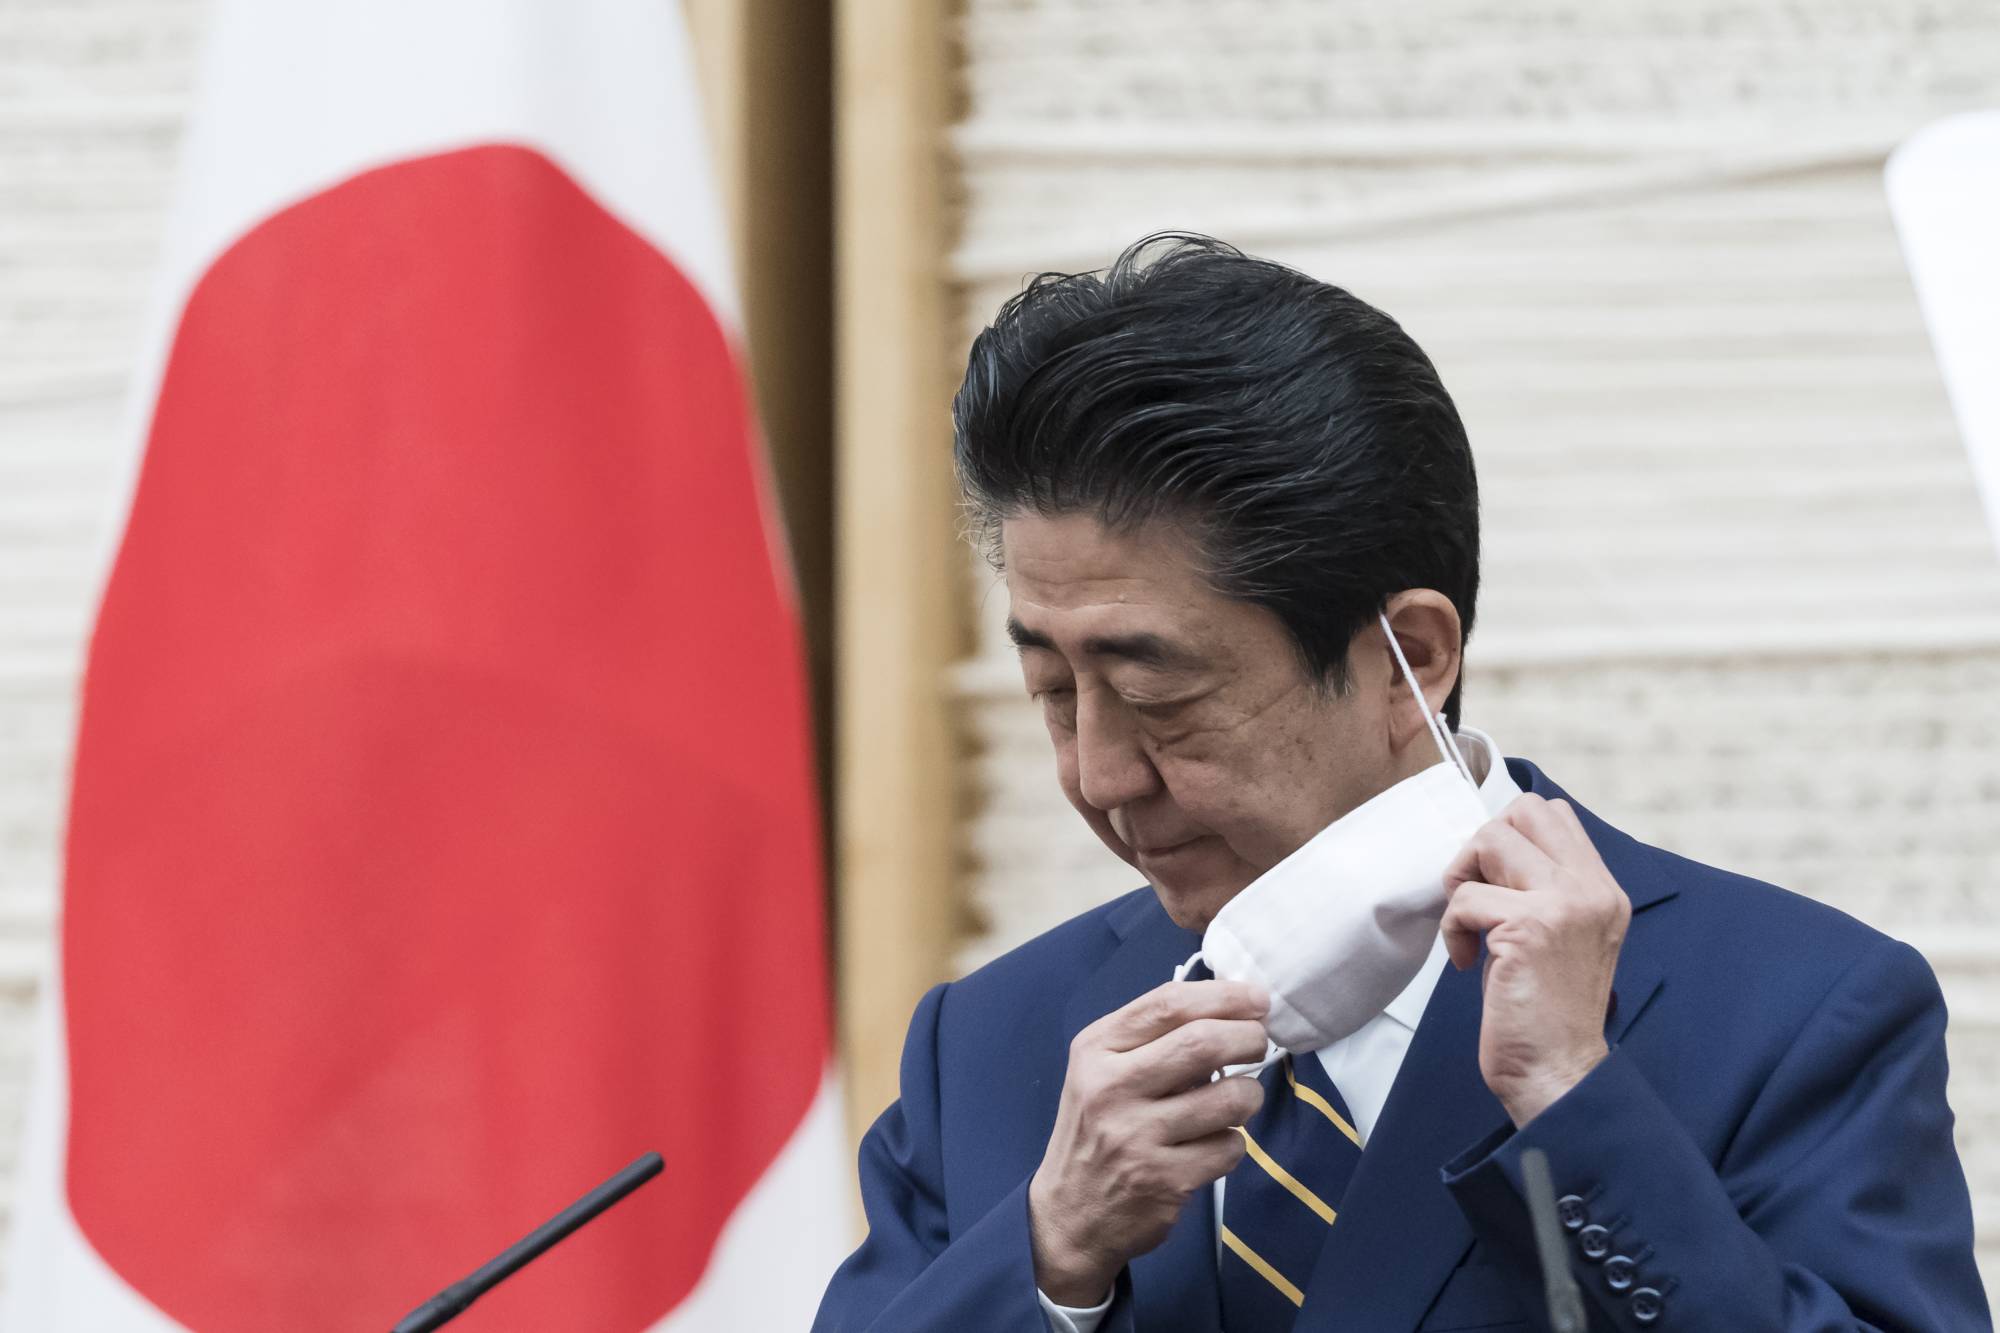 Prime Minister Shinzo Abe removes his mask during a news conference at the Prime Minister's Office on Tuesday after declaring a state of emergency for Tokyo and six other prefectures to contain the spread of the novel coronavirus. | AP